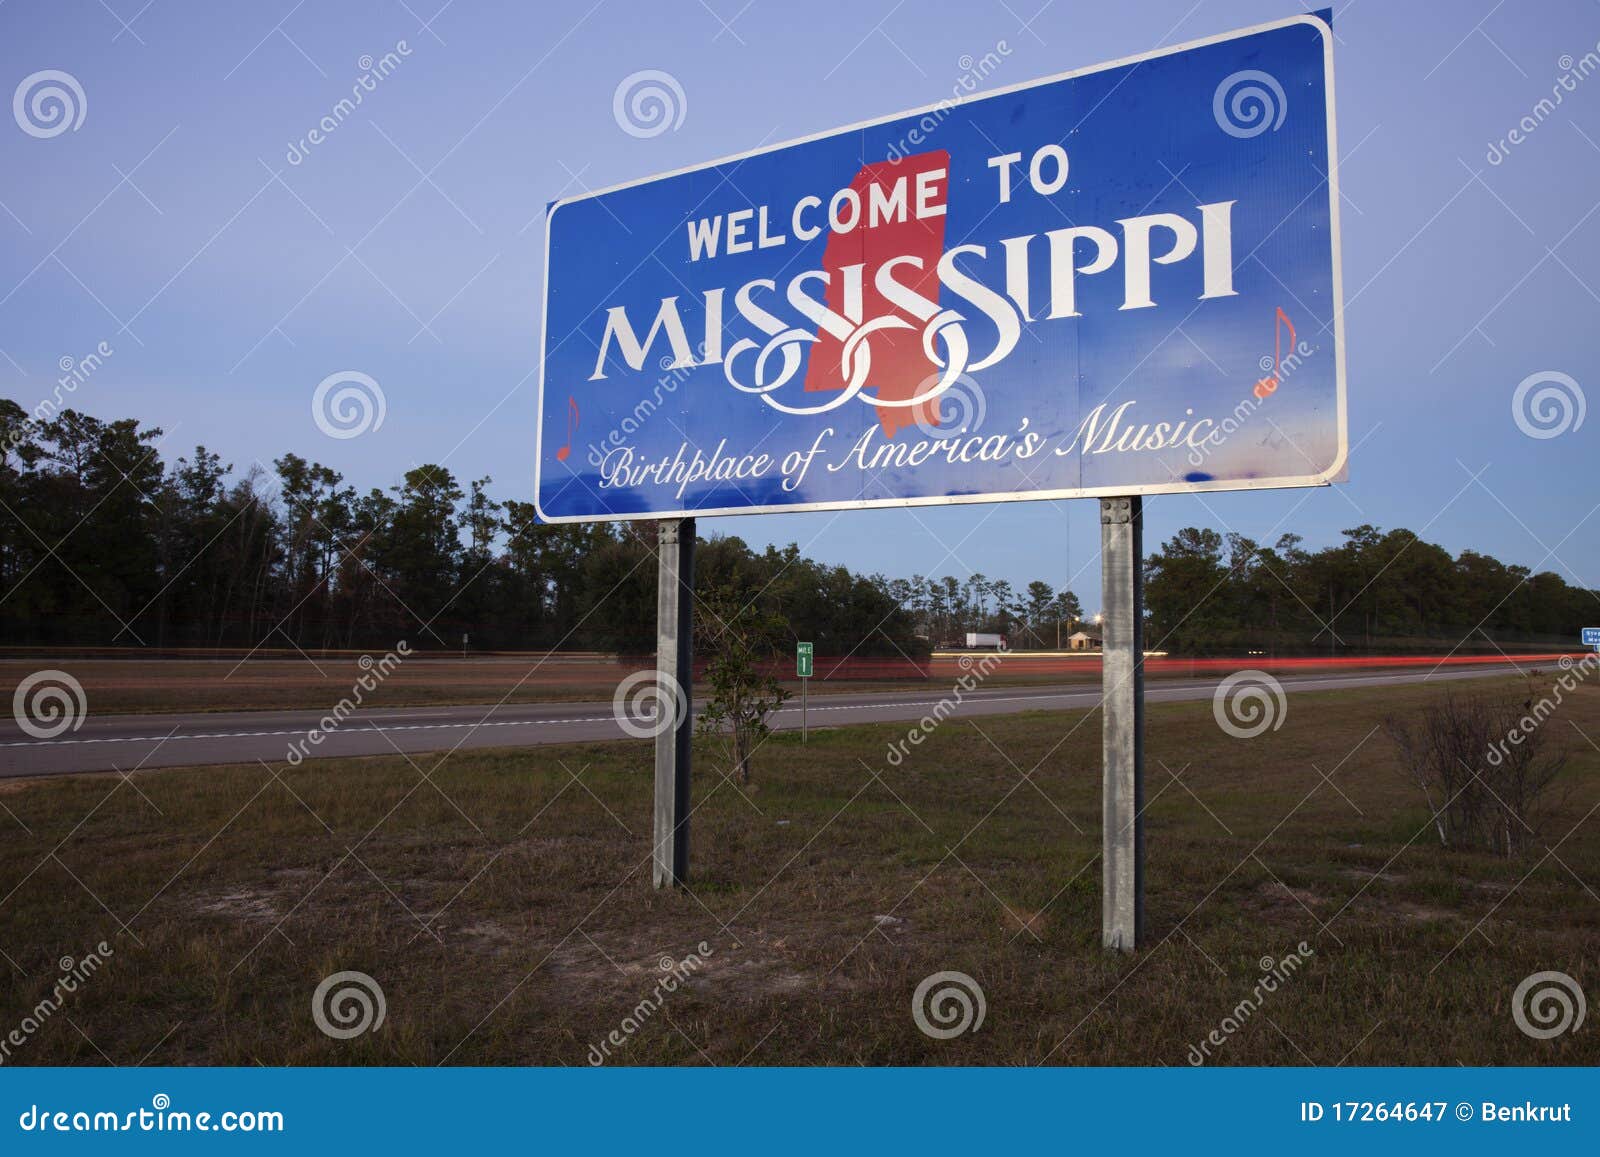 welcome to mississippi